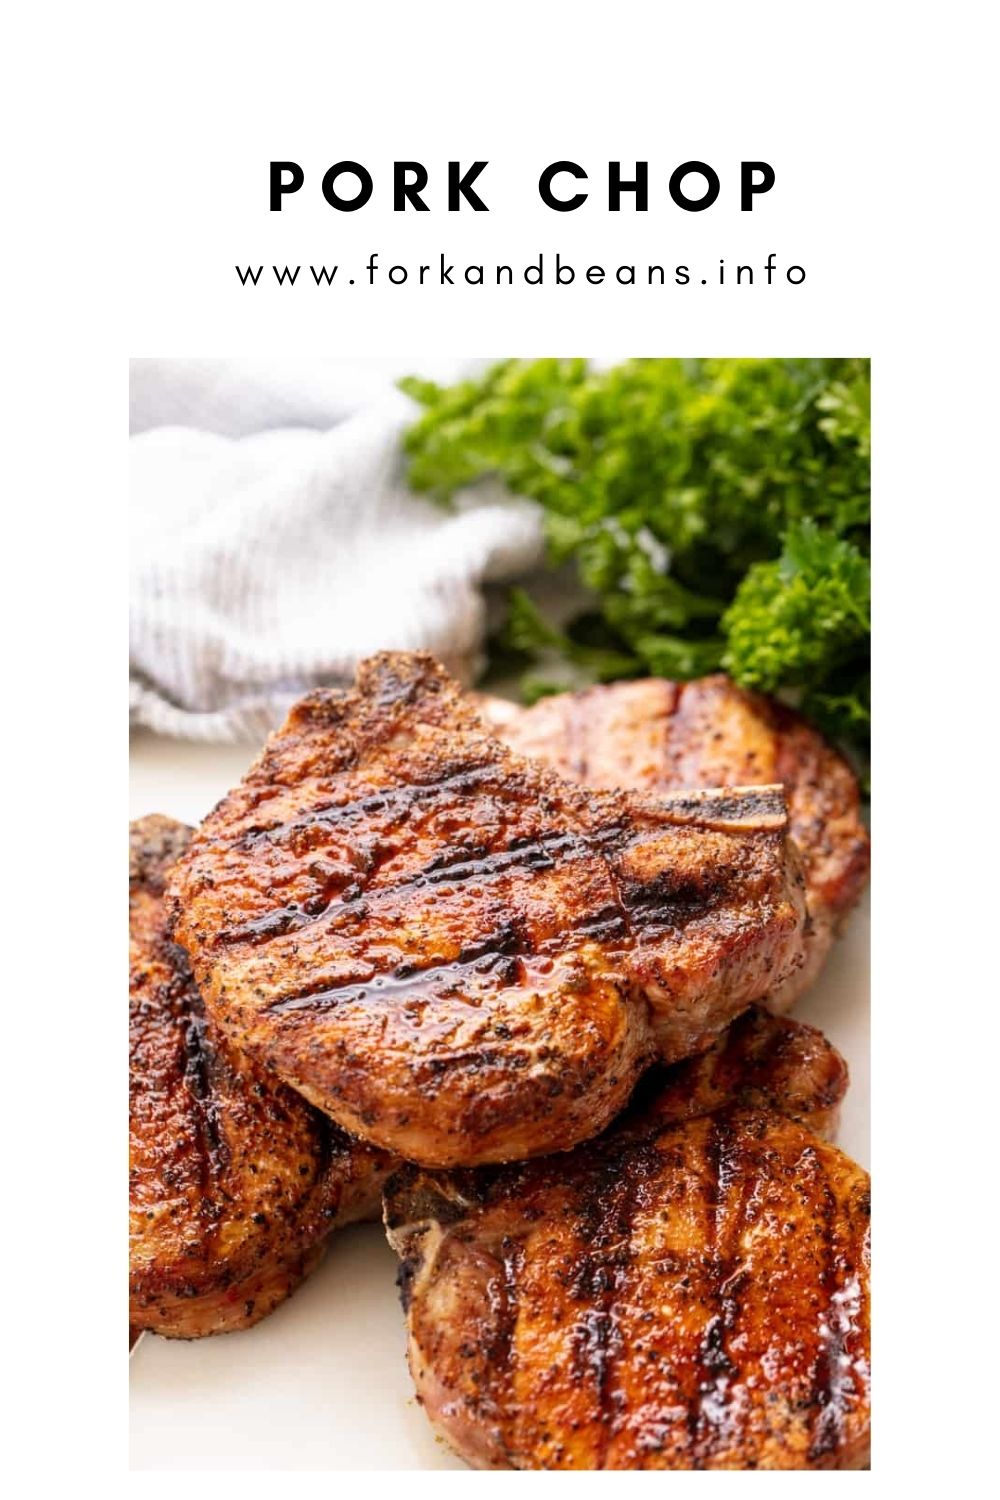 Grilled Pork Chops with Smoked Paprika Rub